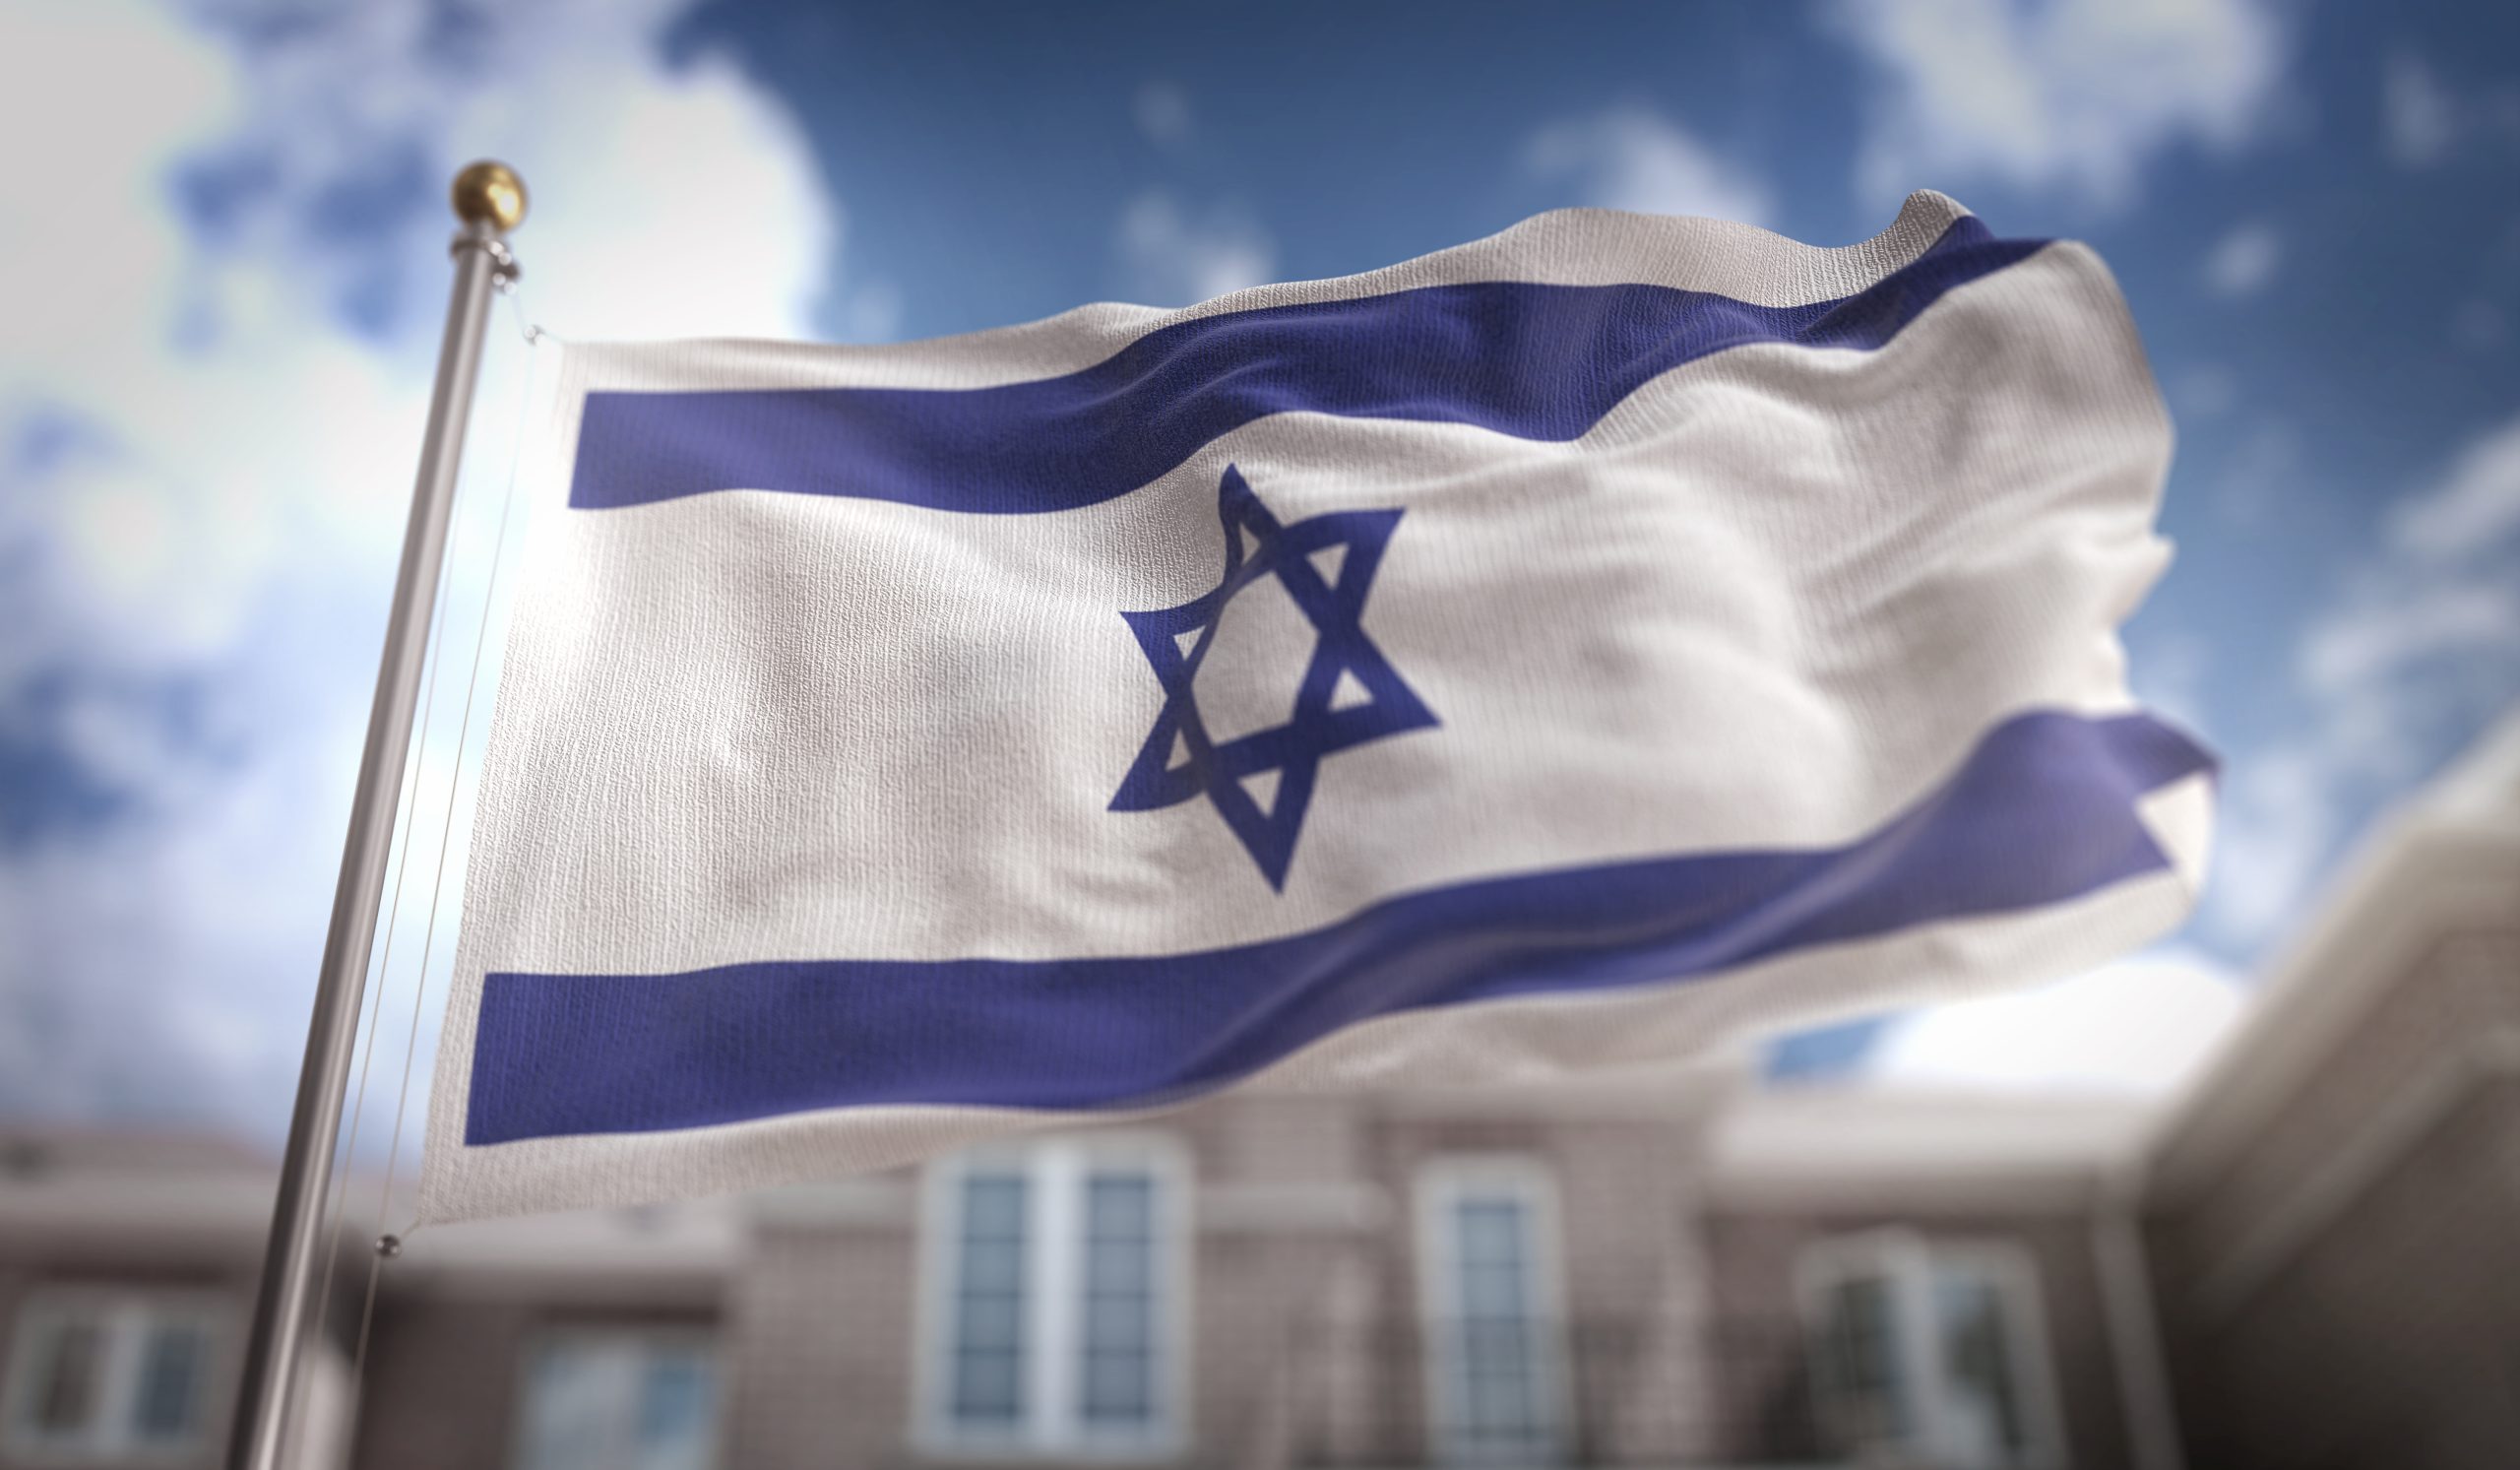 In Case You Missed It – What’s Going on In Israel? Webinar